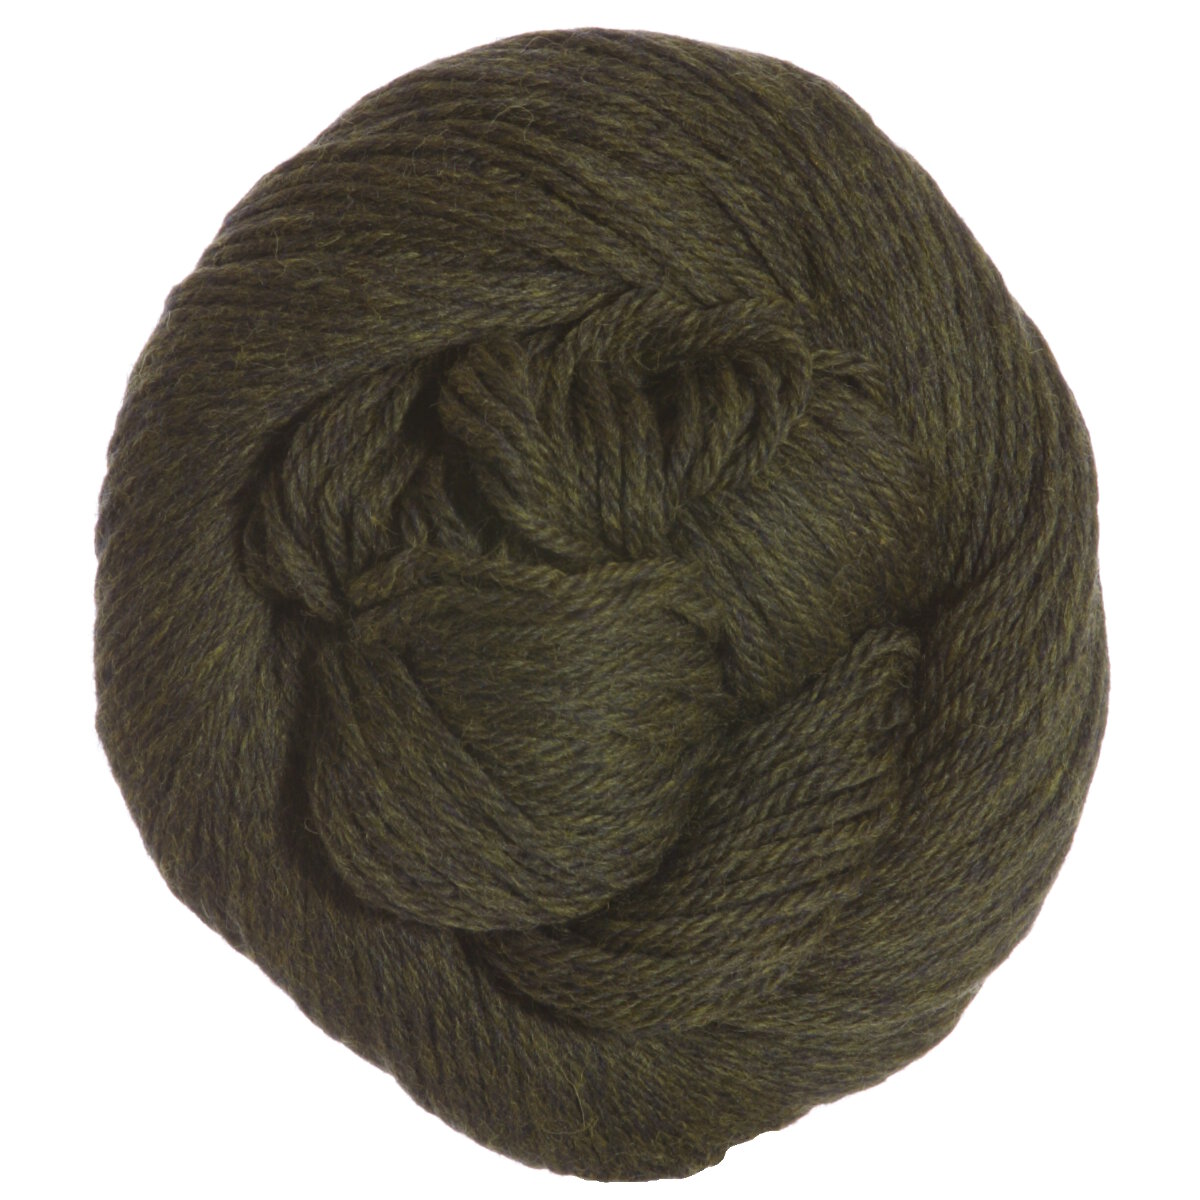 Cascade 220 Heathers Yarn - 9563 Olive Drab Heather (Discontinued) at